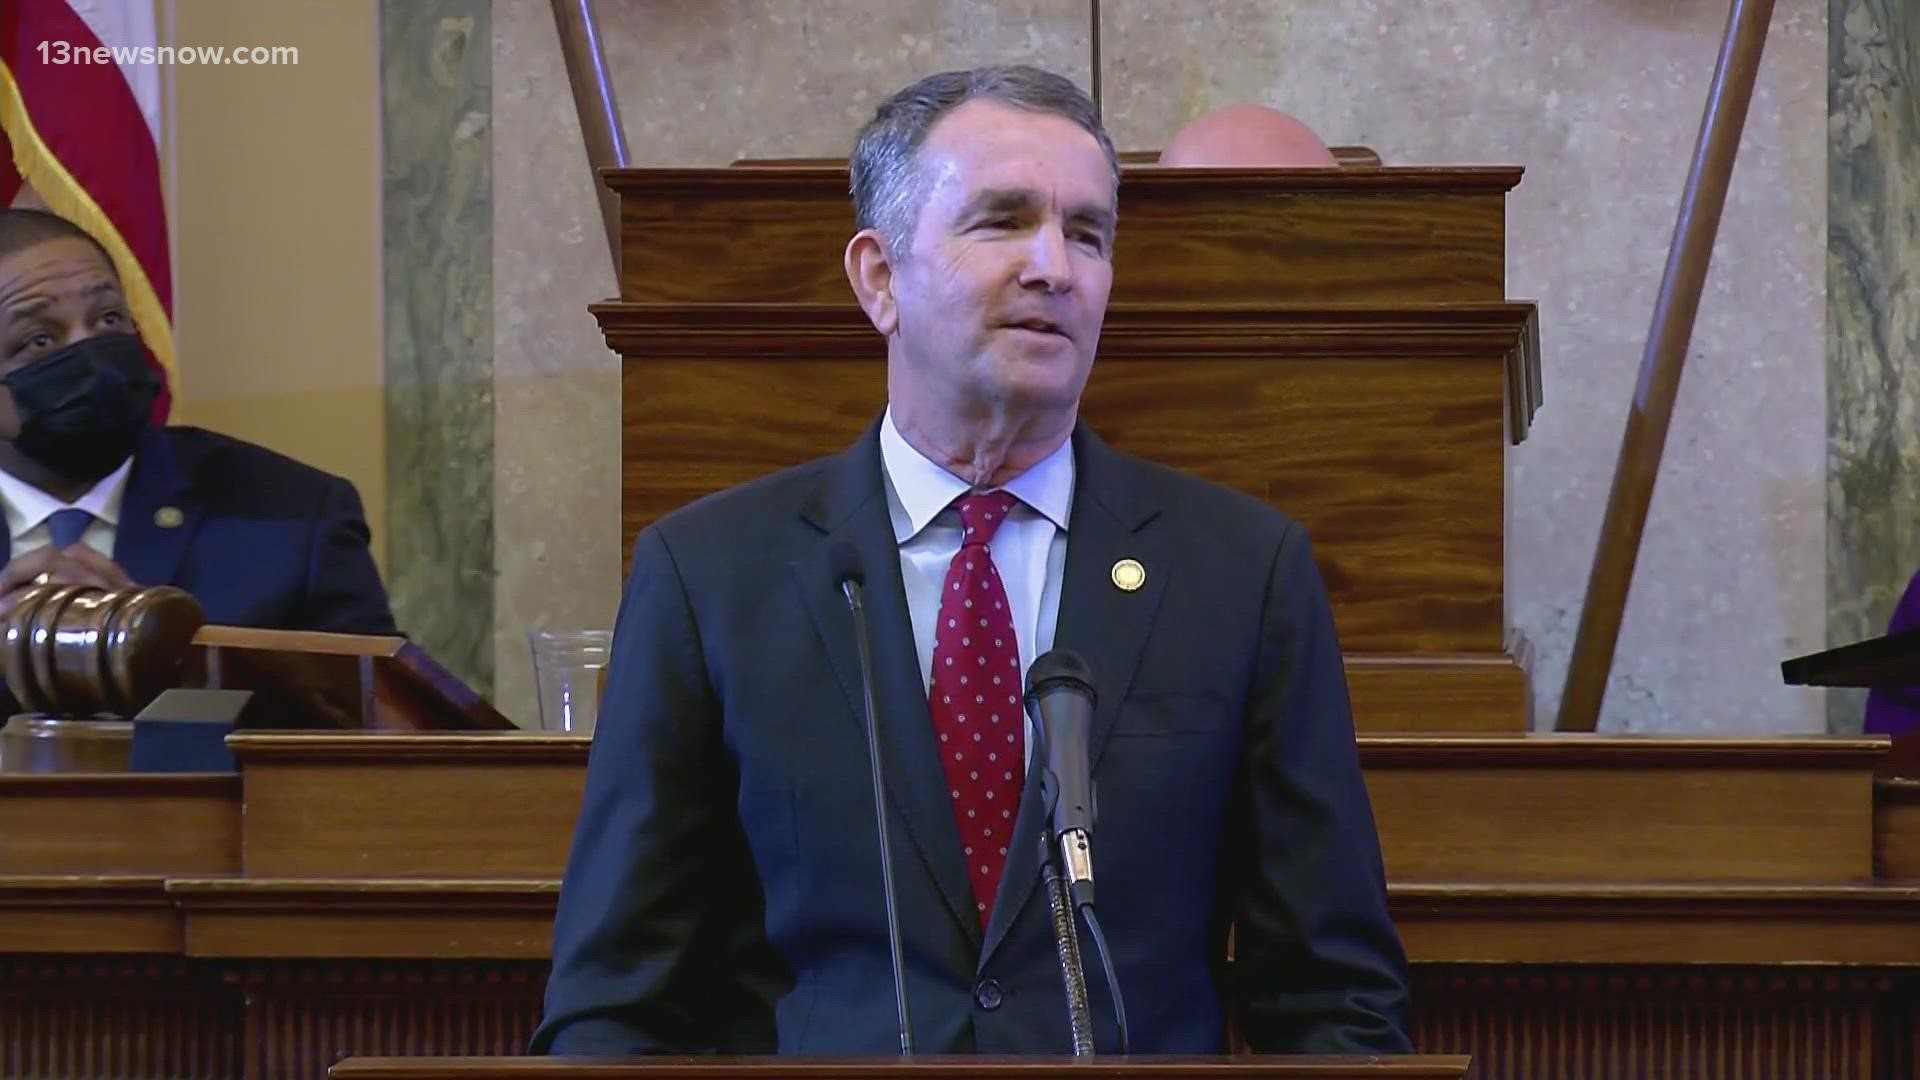 Virginia Gov. Ralph Northam delivered his final State of the Commonwealth address, reflecting on his administration's accomplishments over the last four years.